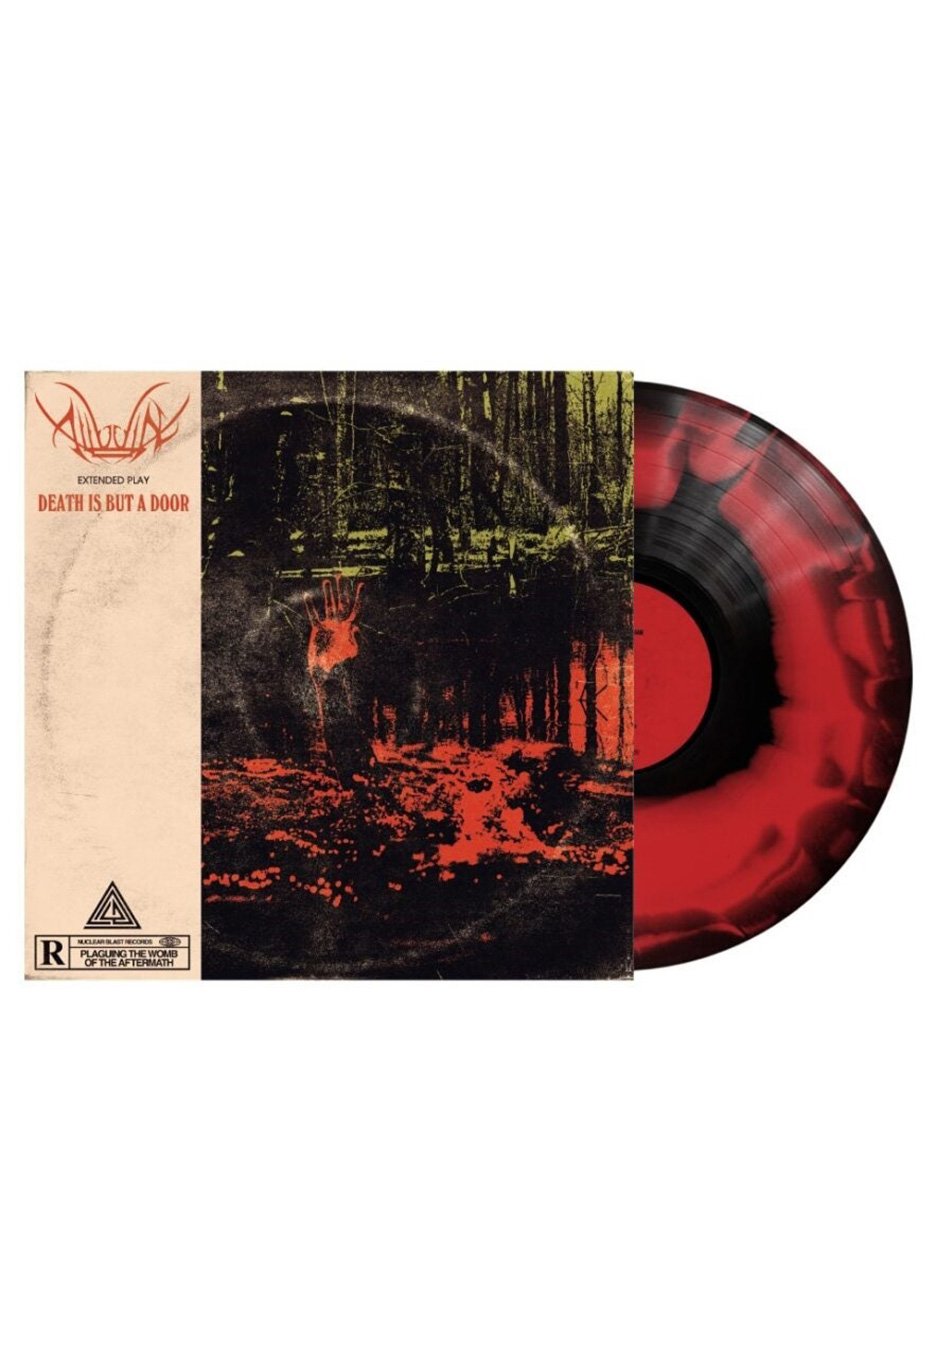 Alluvial - Death Is But A Door Ltd. Black/Red Swirl - Colored Vinyl | Neutral-Image